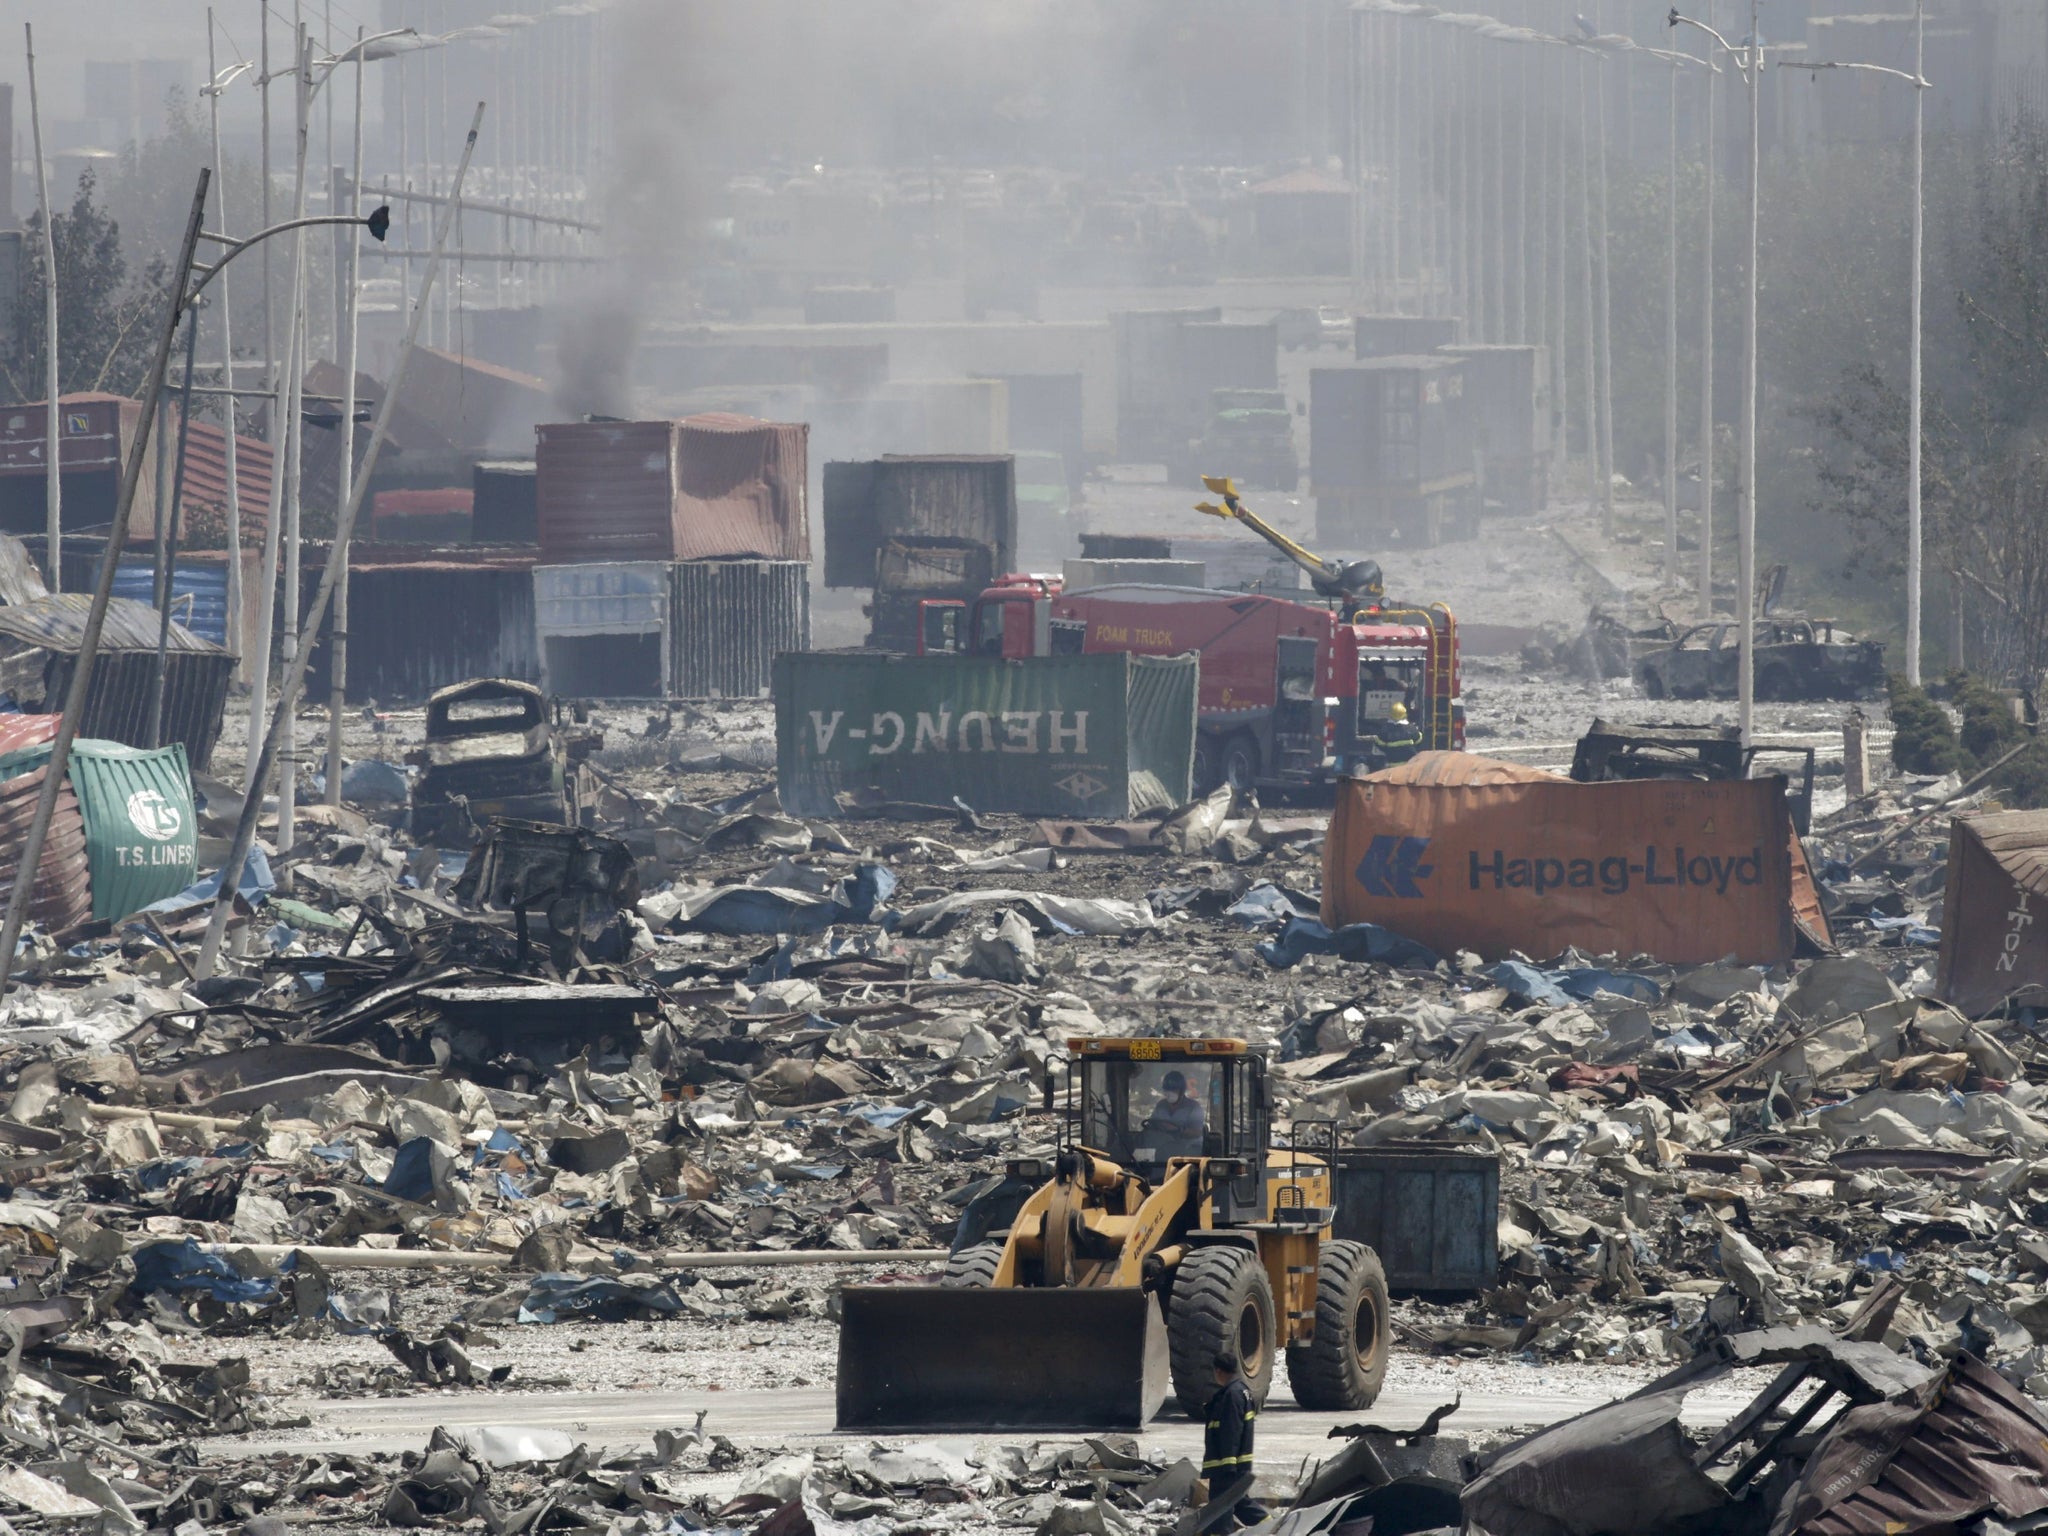 Excavators work near the site of the explosions at the Binhai new district, Tianji